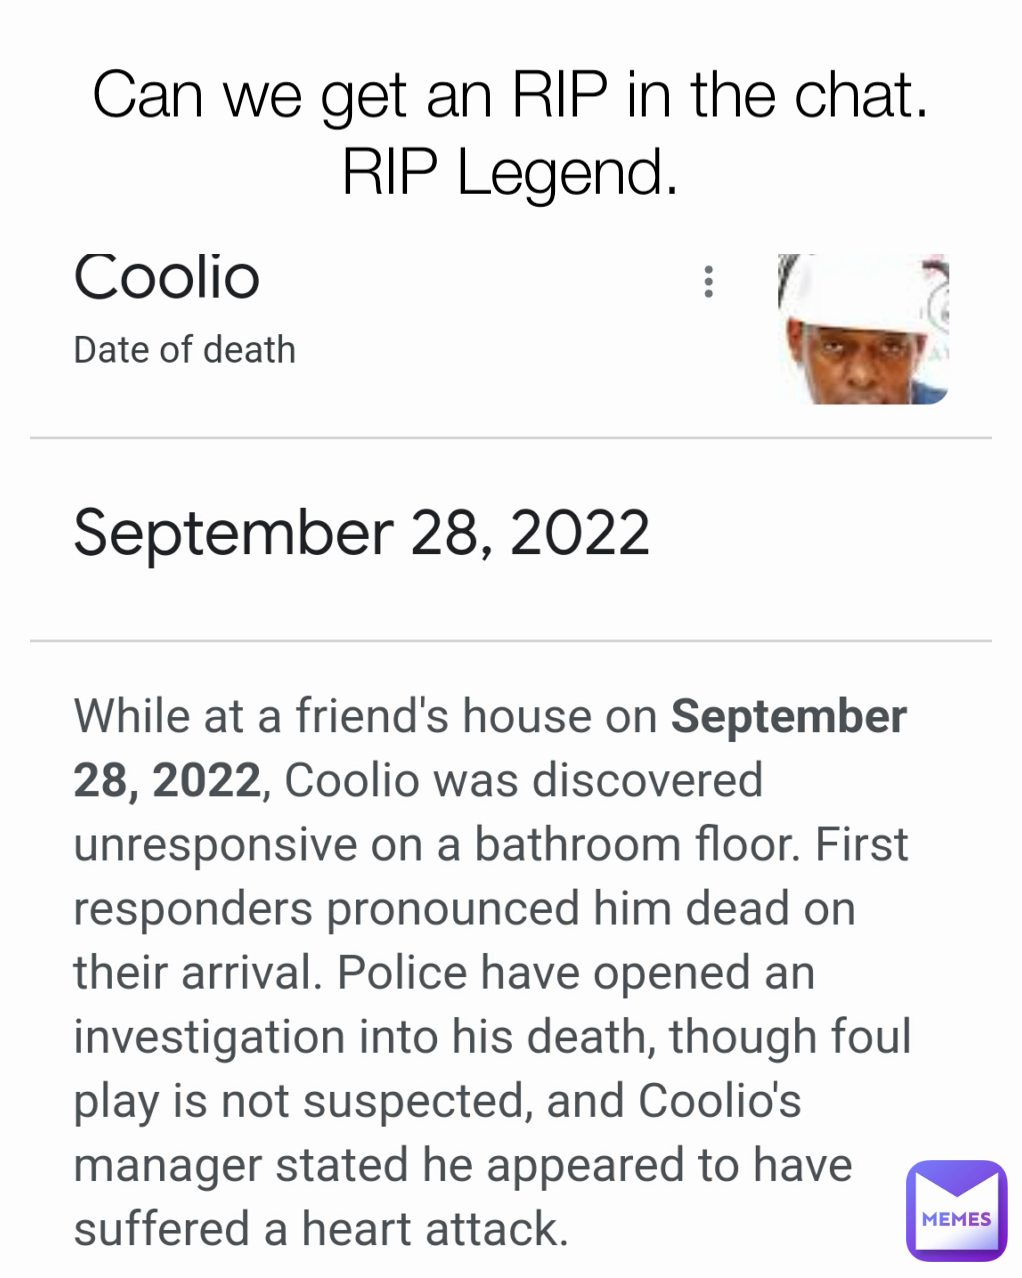 Can we get an RIP in the chat. RIP Legend.